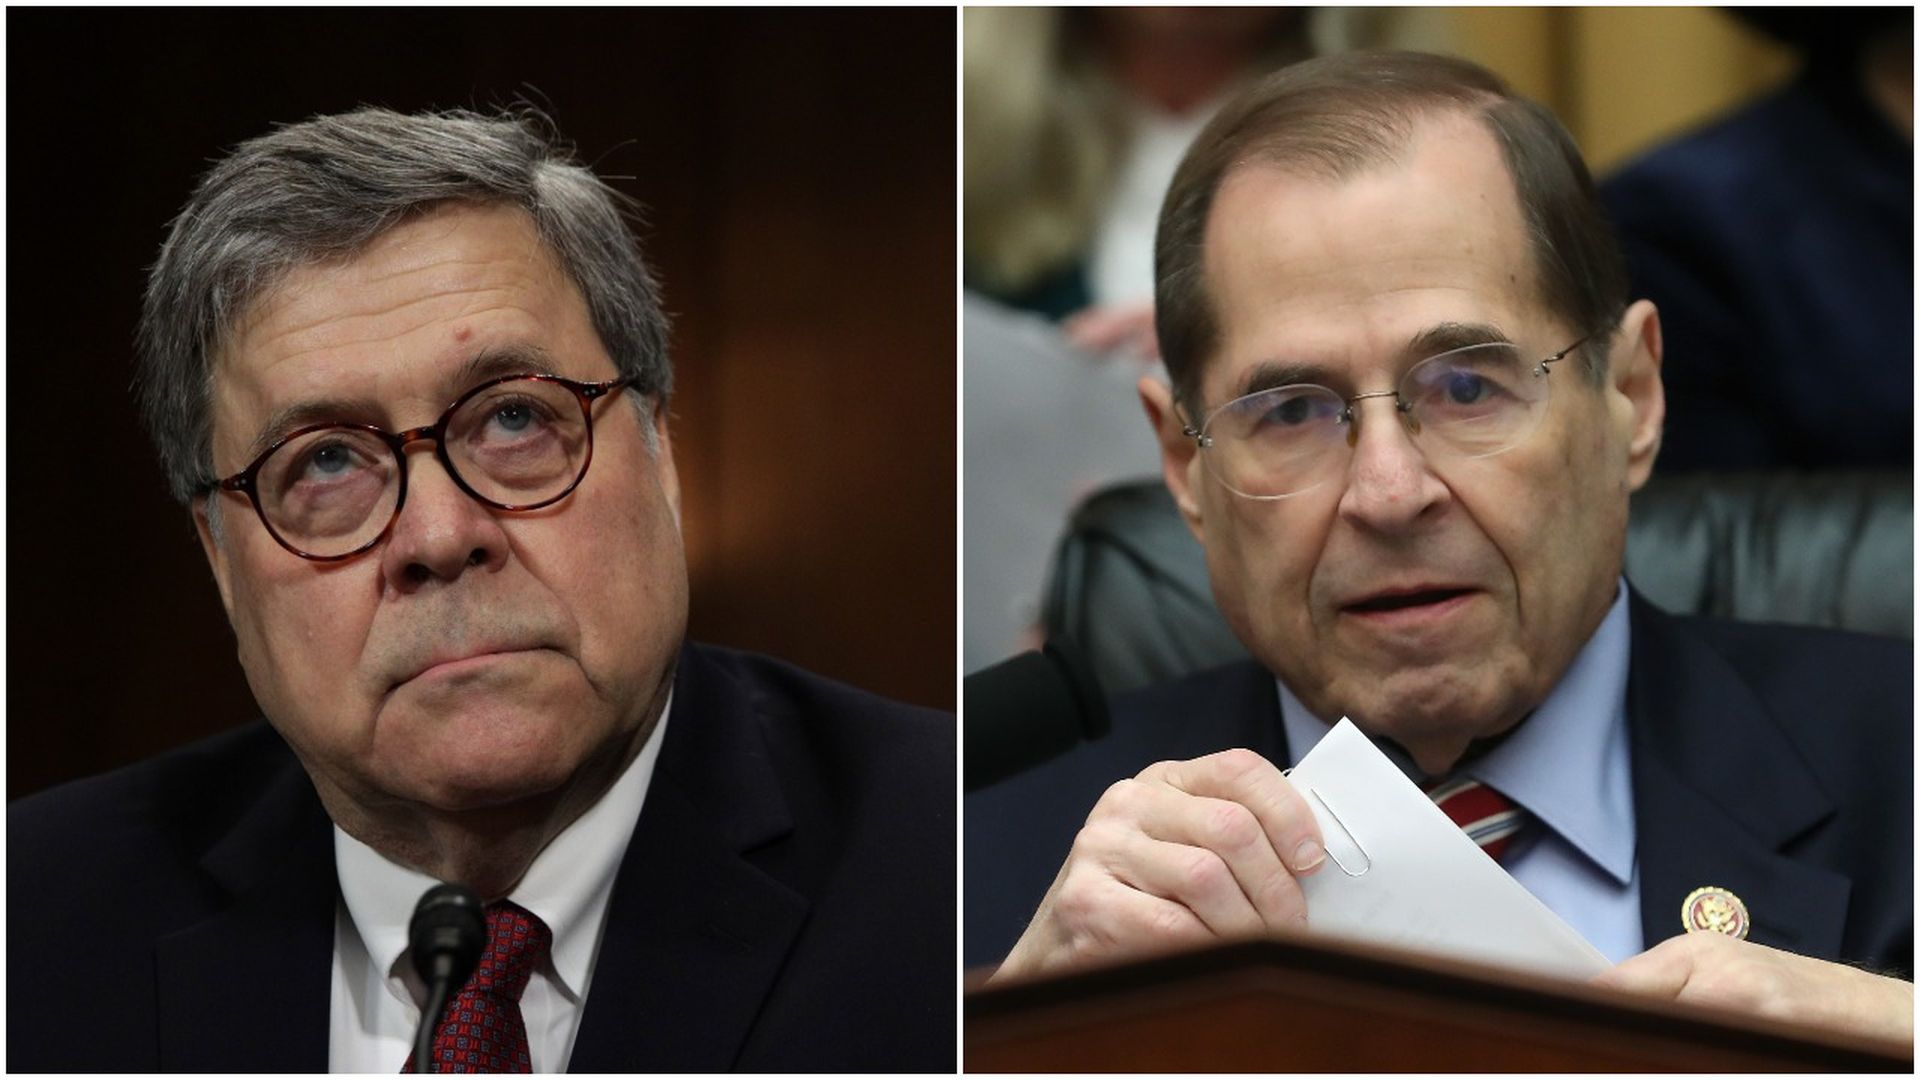 This image is a split screen between Attorney General Bill Barr and Jerry Nadler.